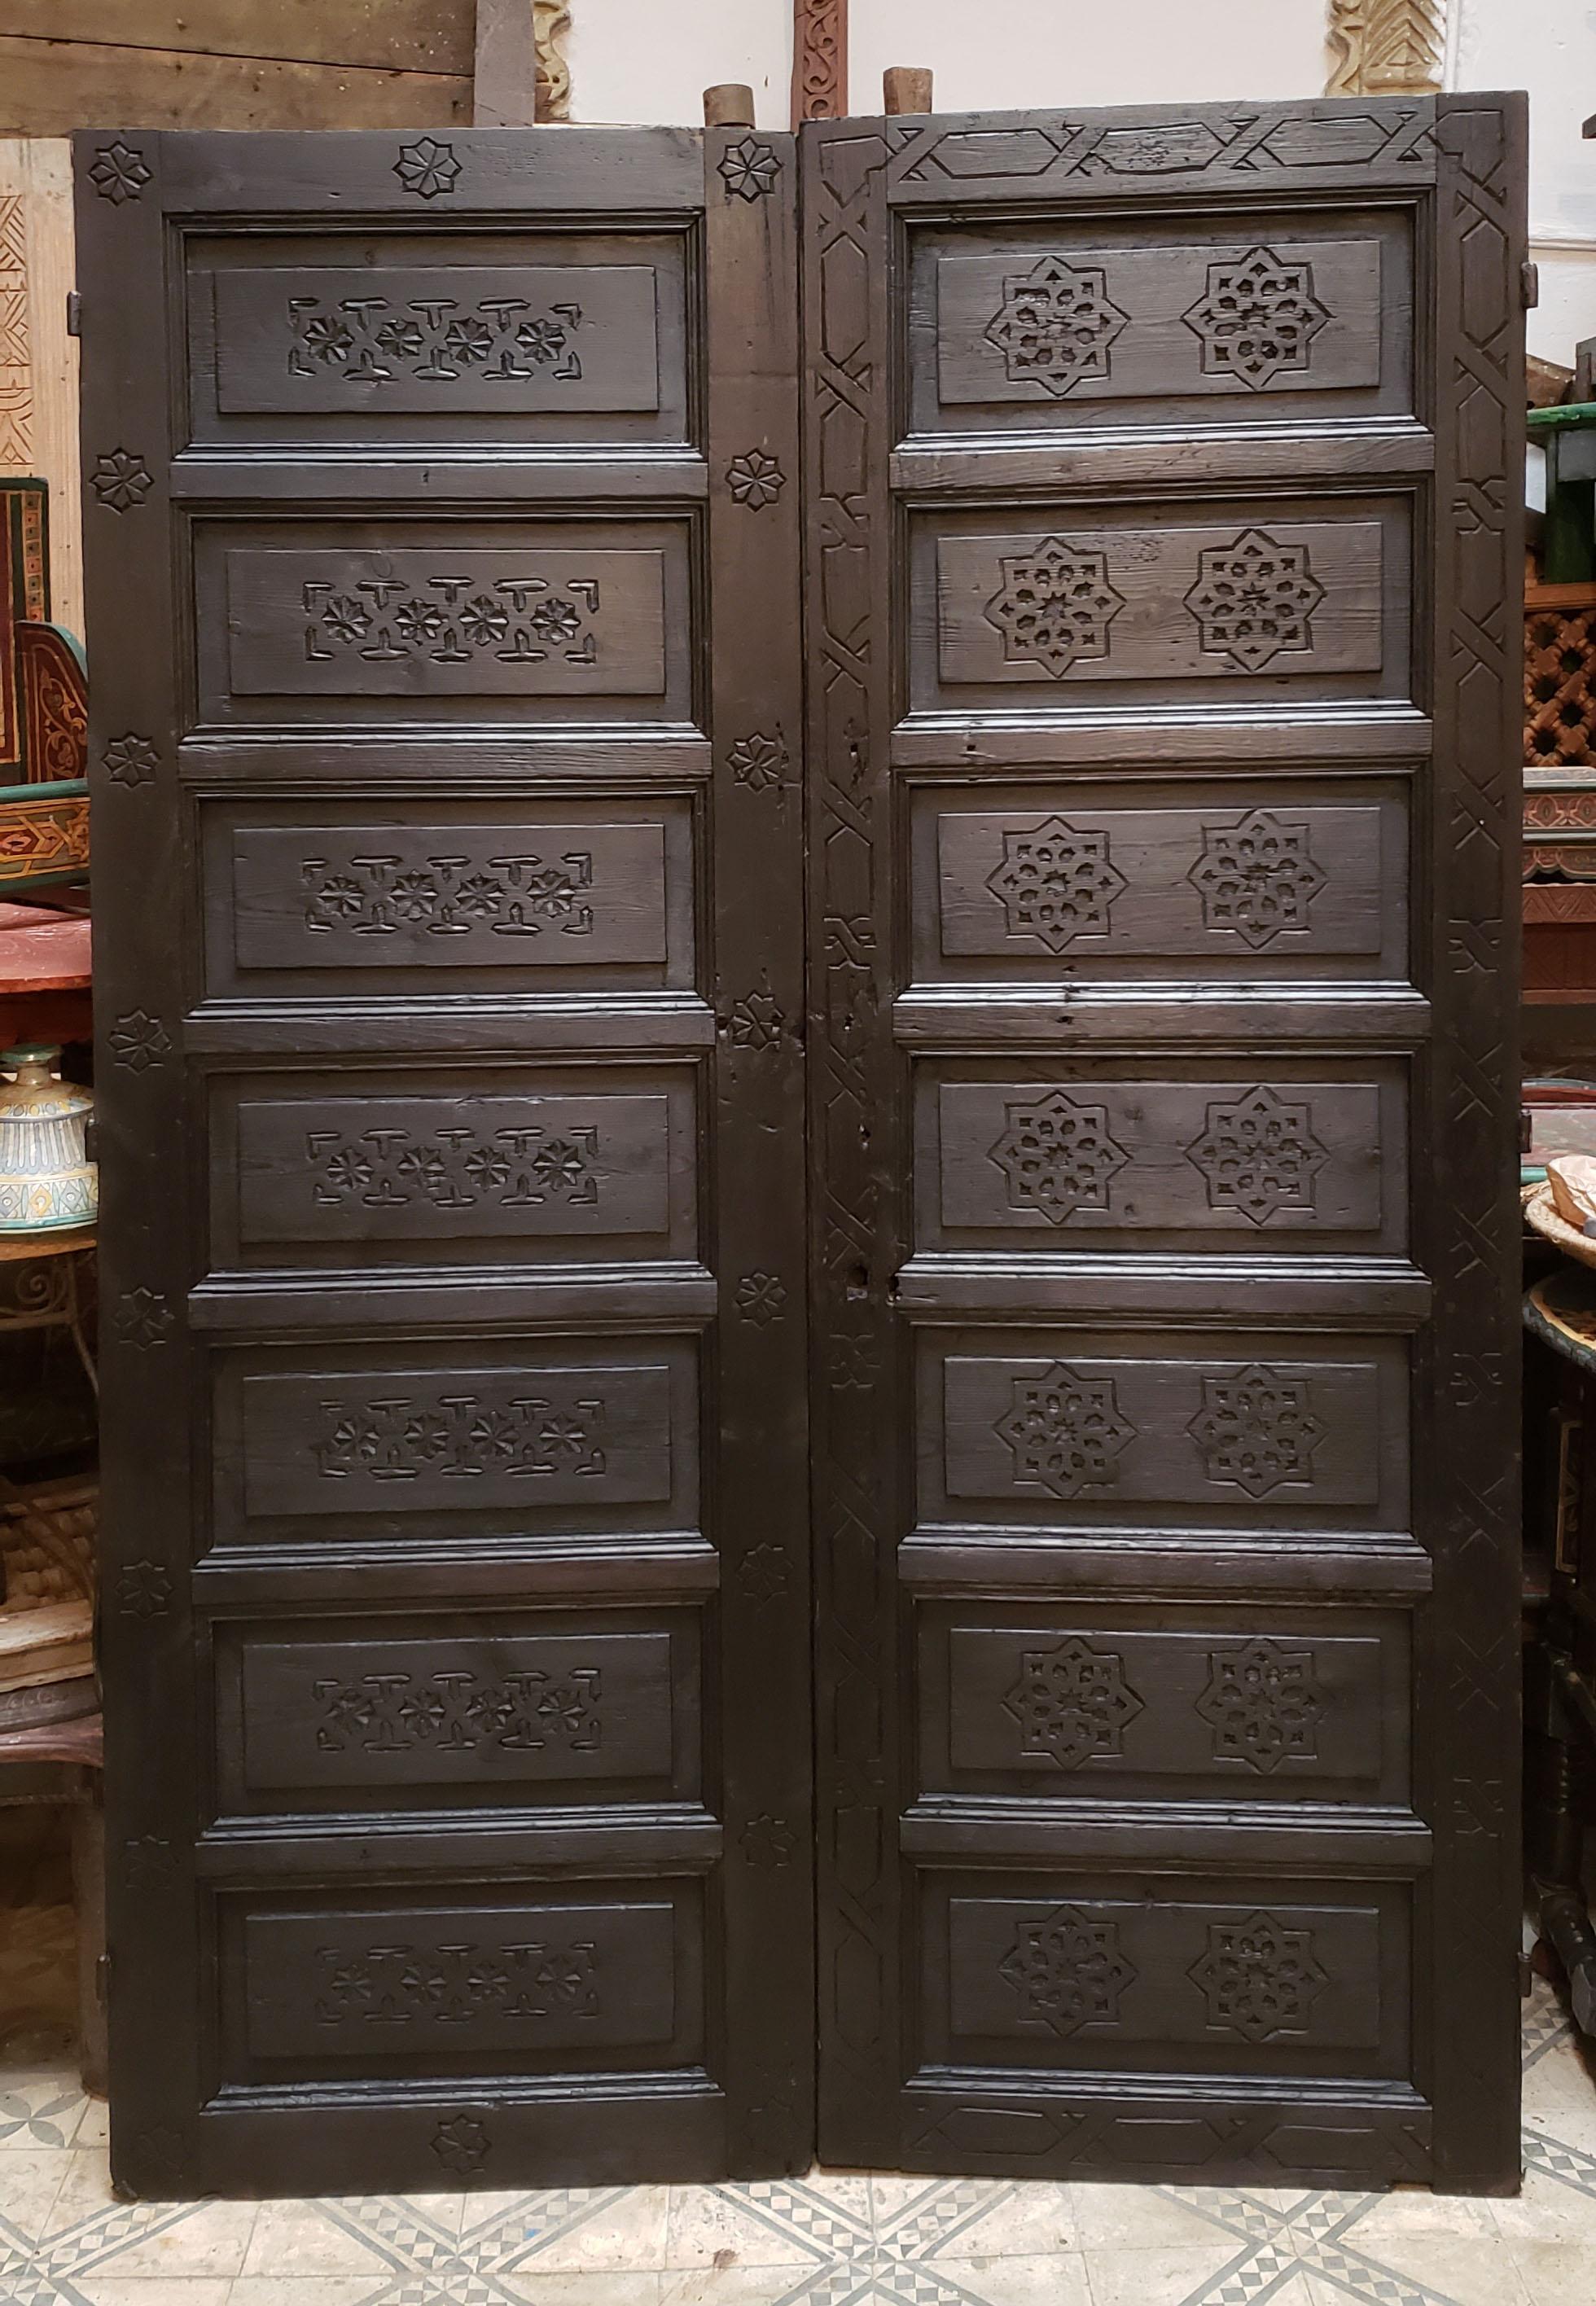 Another amazing double panel Moroccan door measuring approximately 80